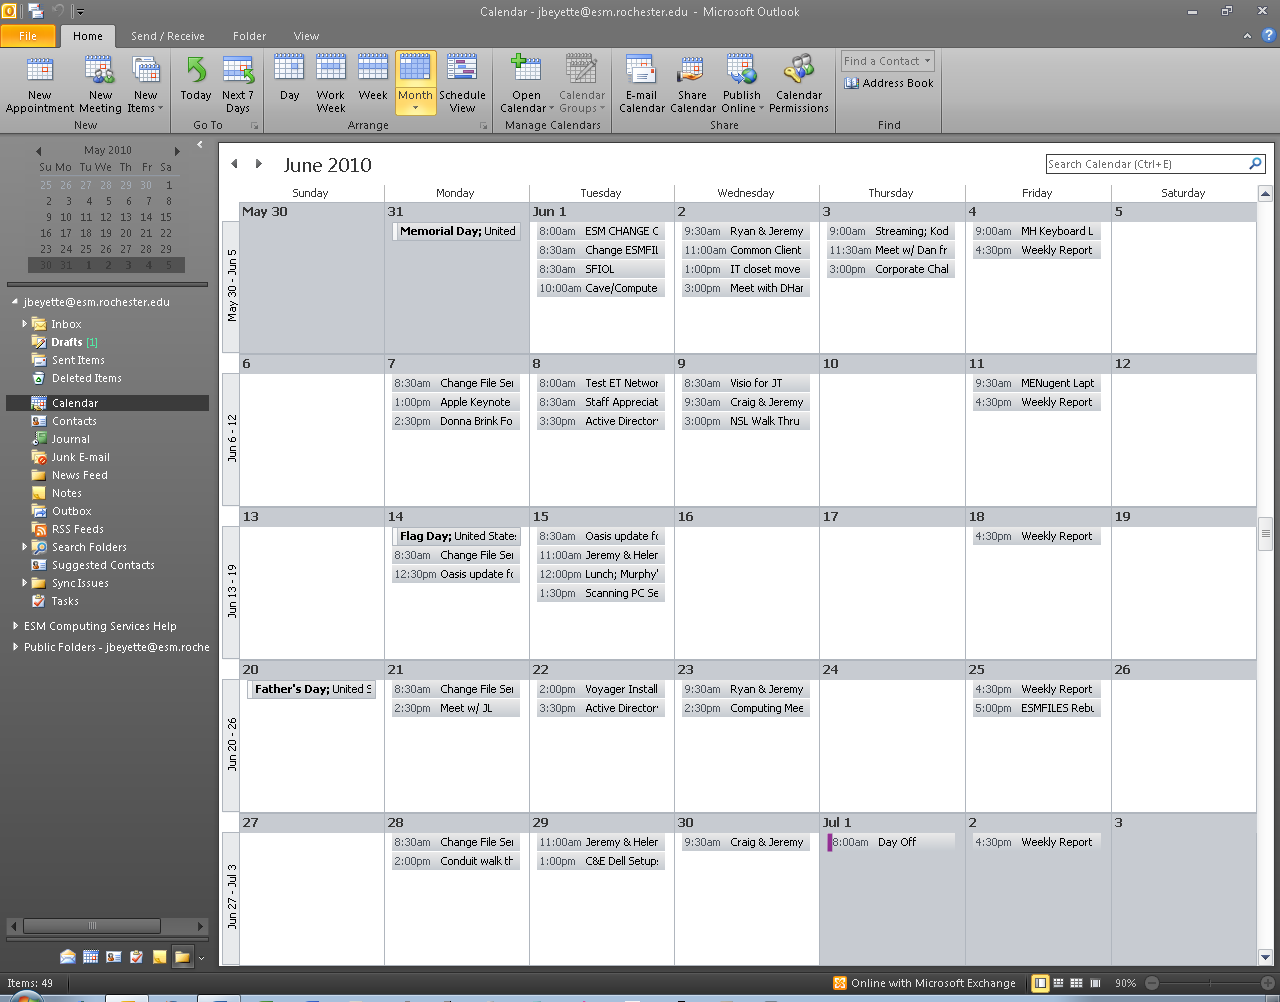 Calendar Calendar Views The calendar is a useful tool for keeping track of important dates, meetings, and appointments.